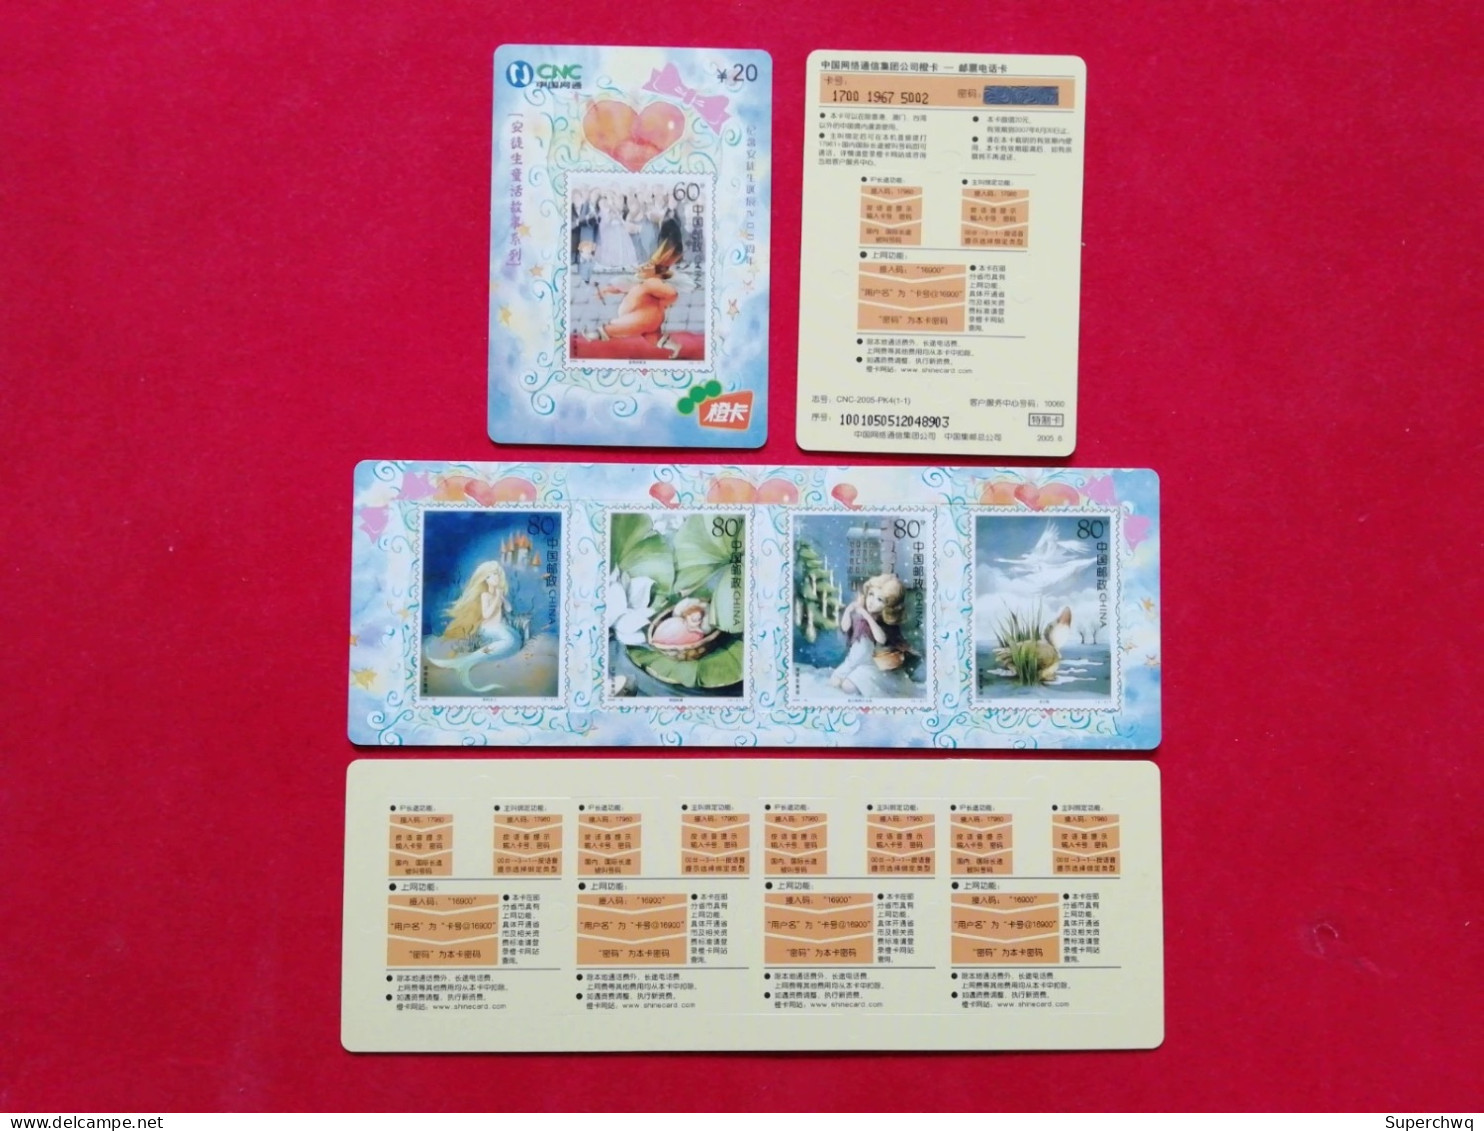 China Phone Cards Complete Collection Of Alien Telephone Cards In Hans Christian Andersen's Fairy Tales - China